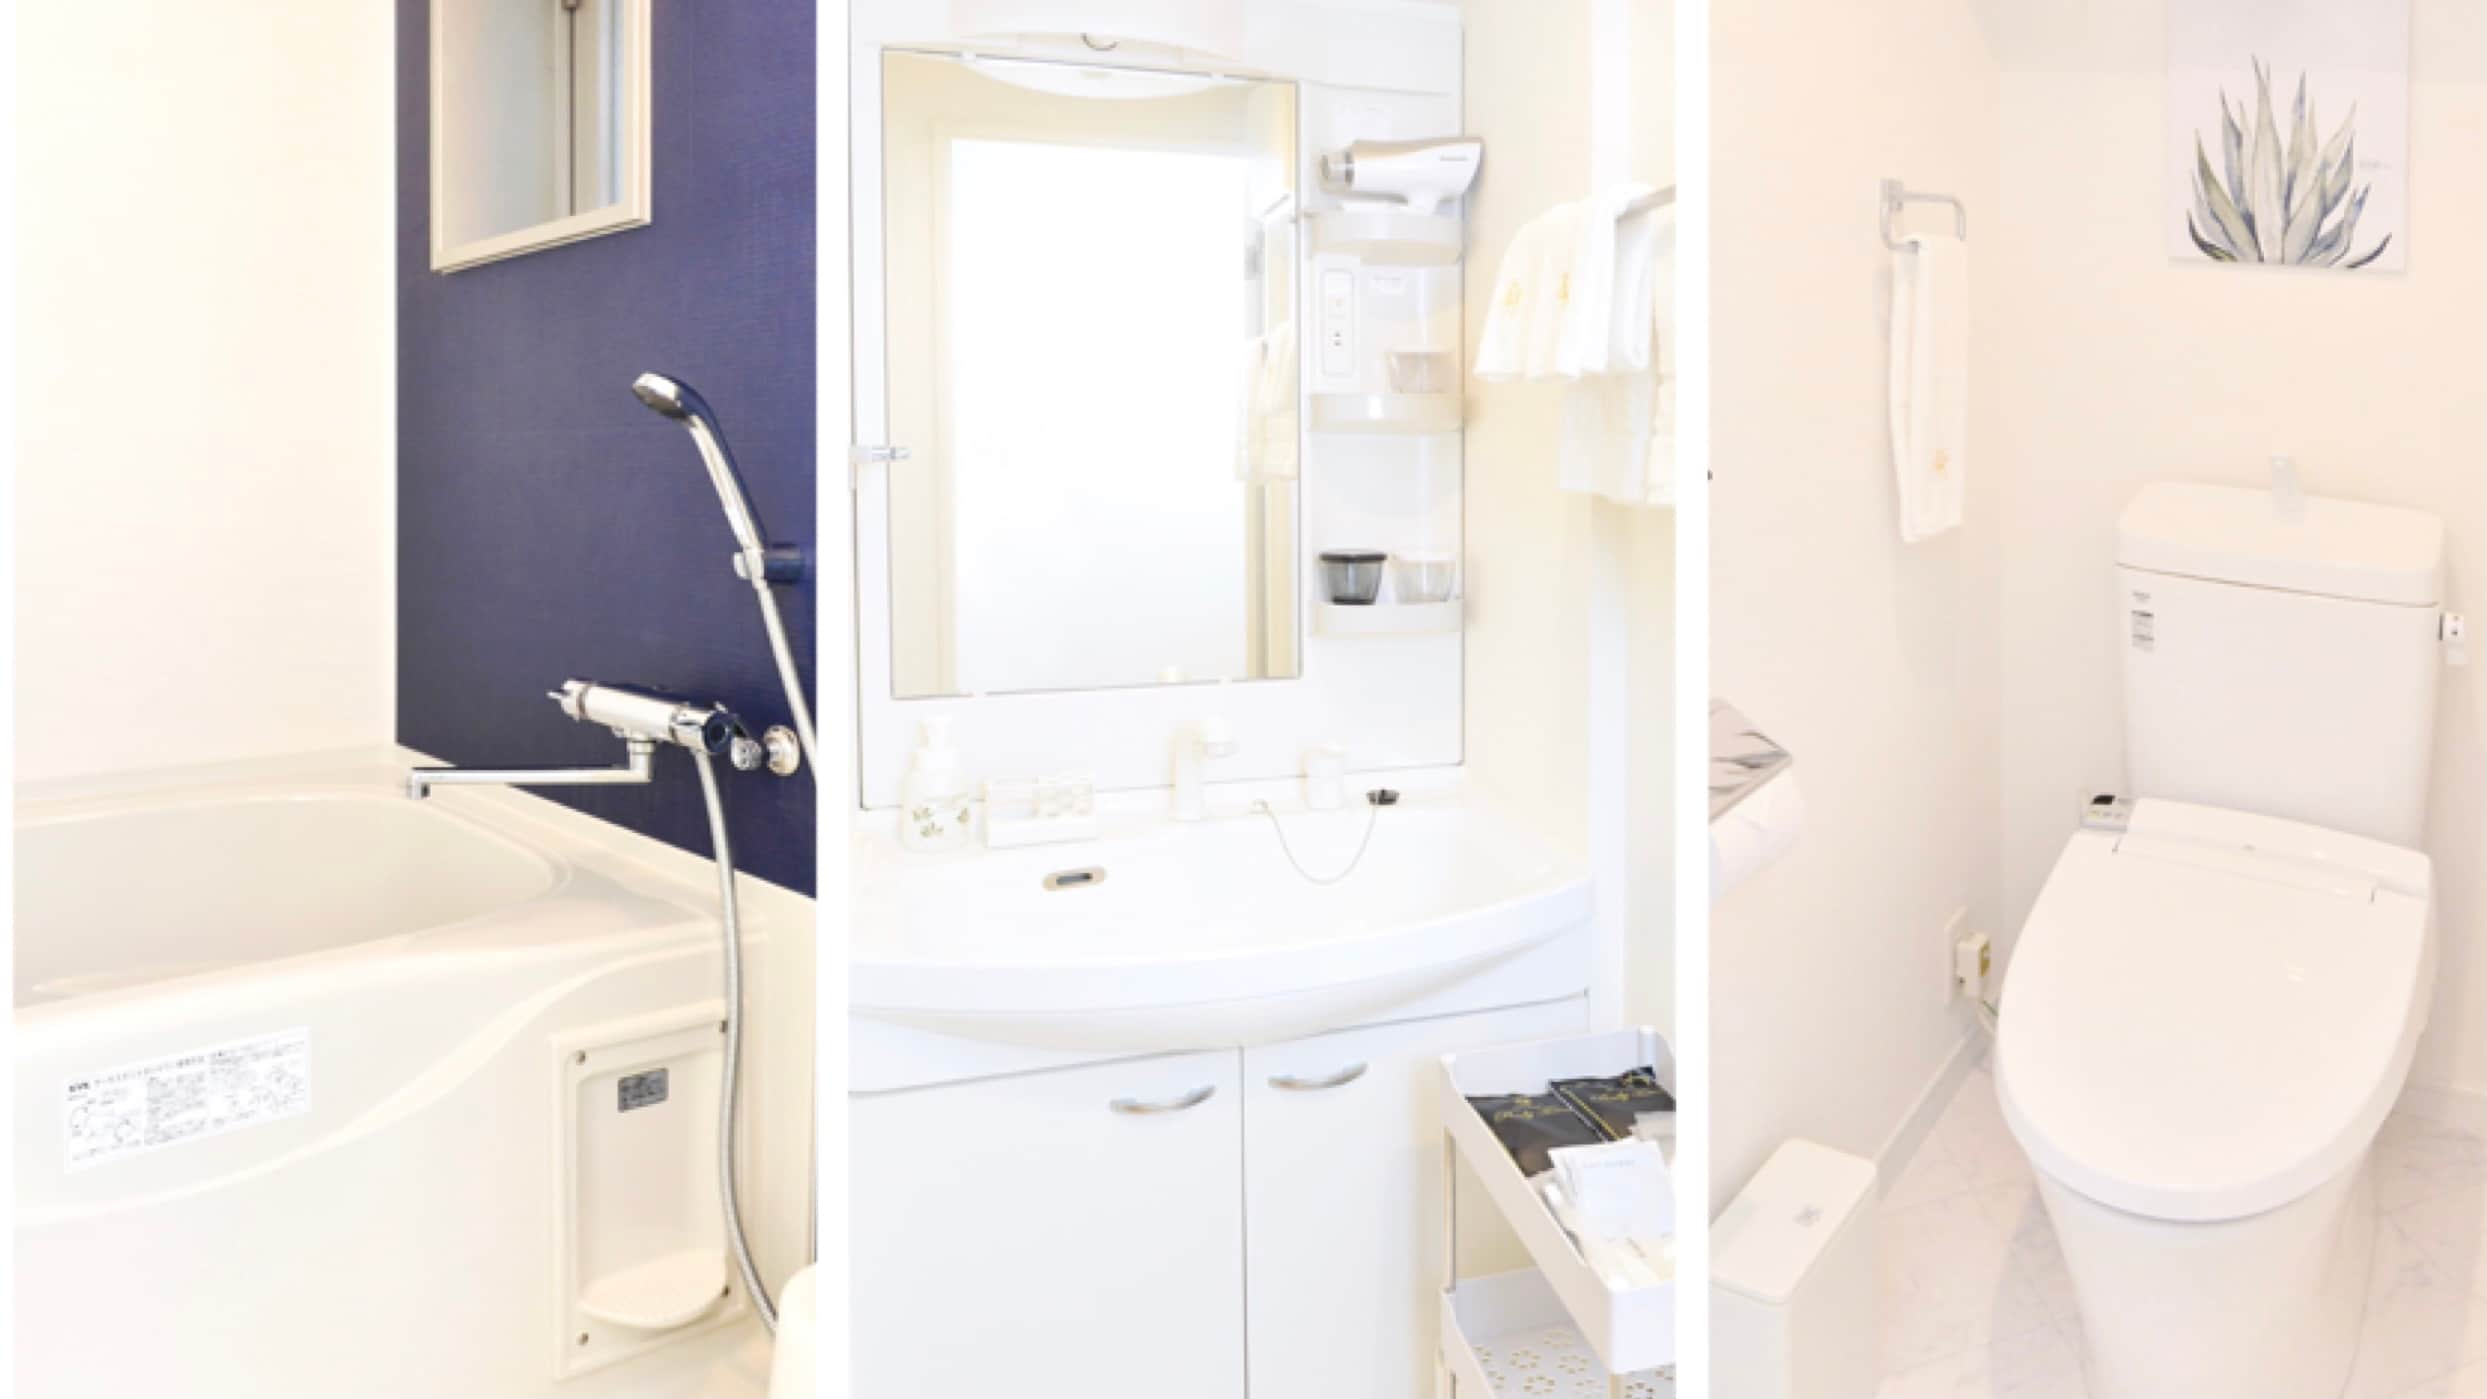 ANNEX | Separate bathroom and toilet, with washroom and changing room♪